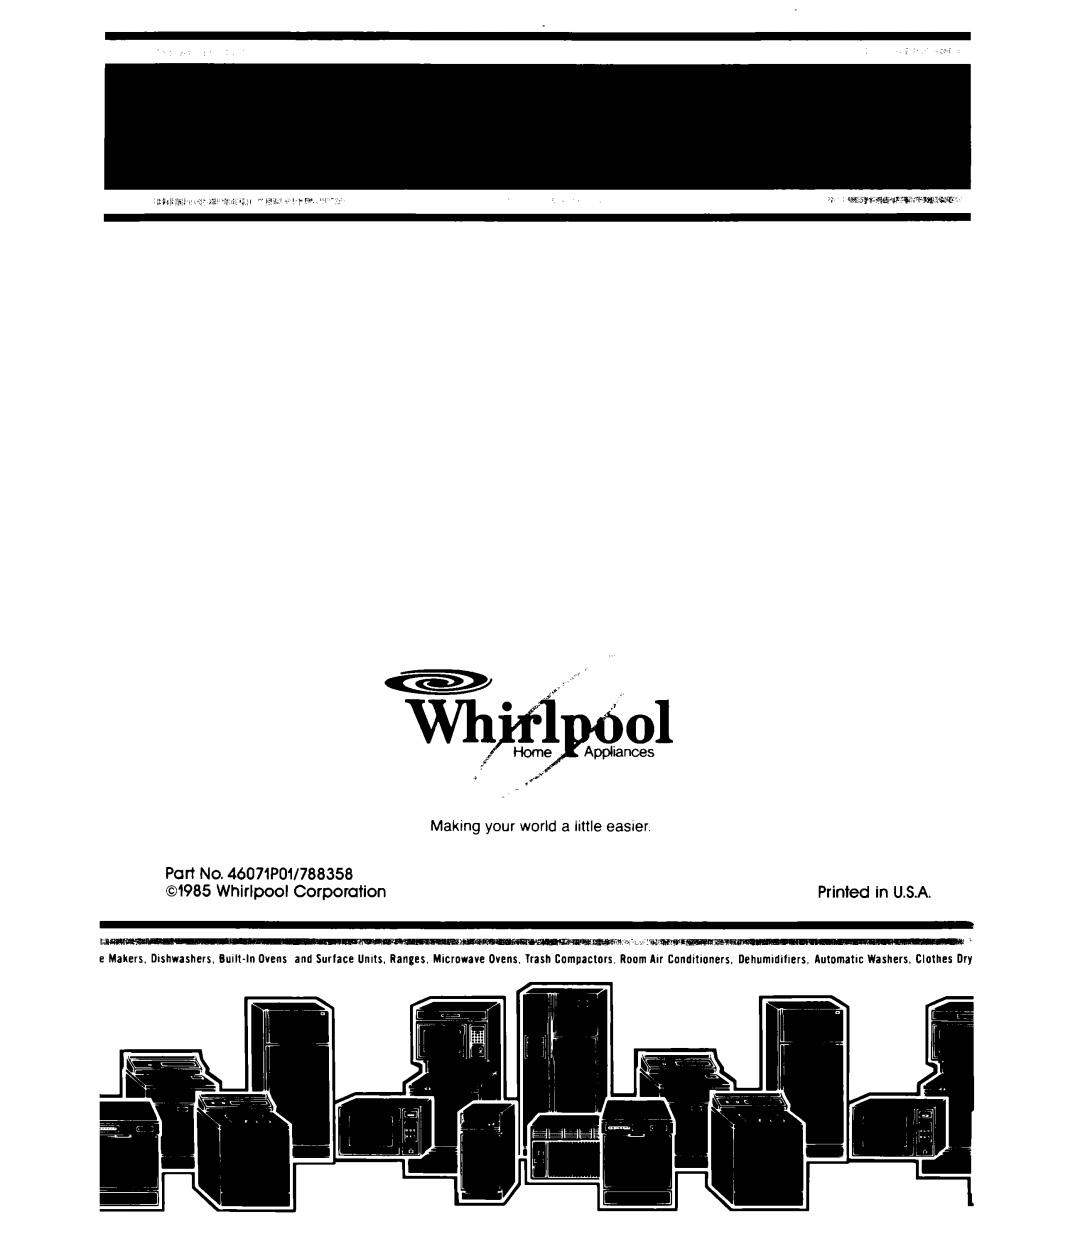 Whirlpool MW3OOOXP manual rices, Part No. 46071POll7B8350, Whirlpool Corporation 